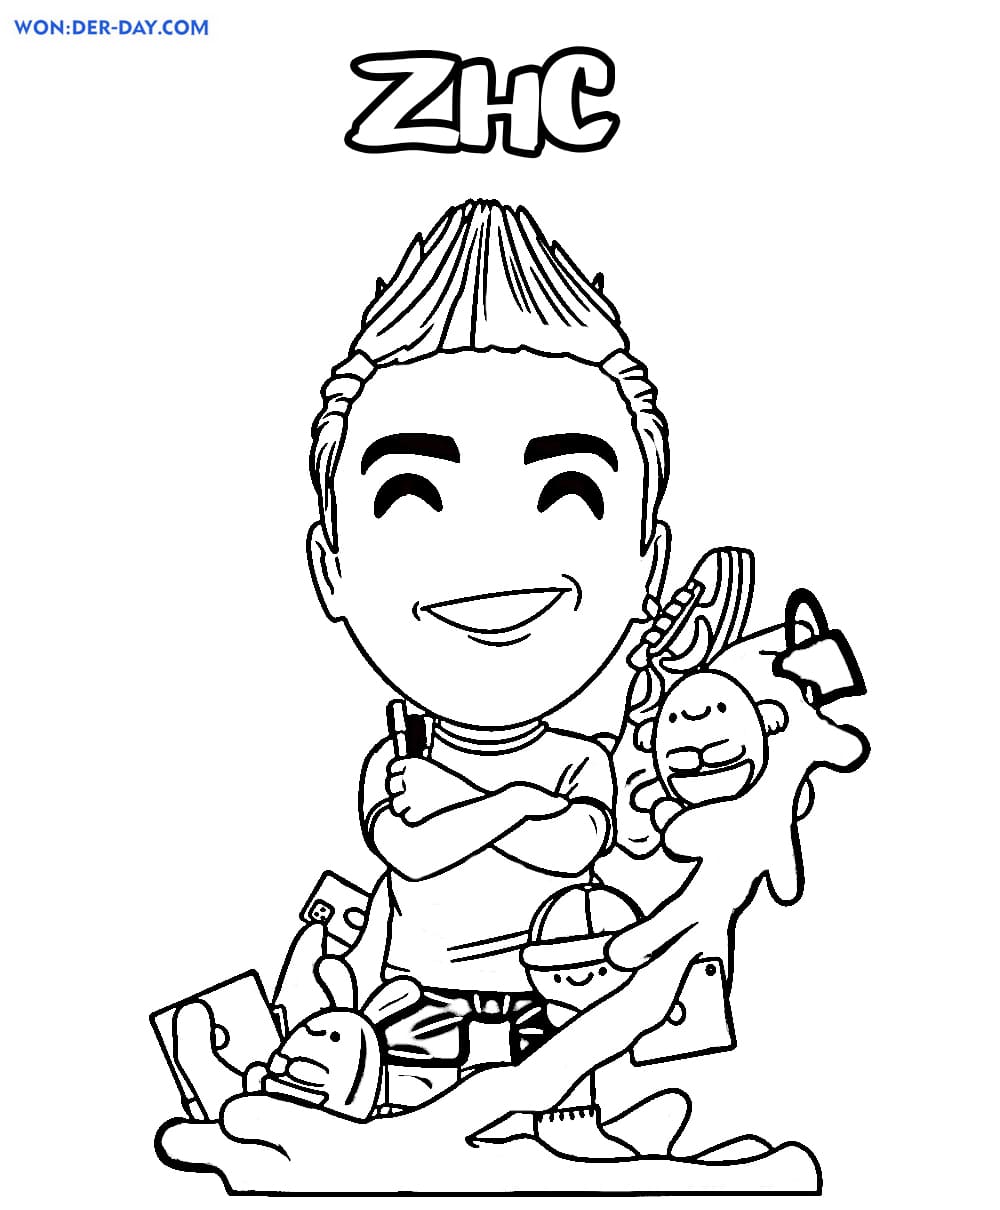 Zhc Coloring Pages Free Coloring Pages Wonder Day Coloring Pages For Children And Adults - mr beast brawl stars